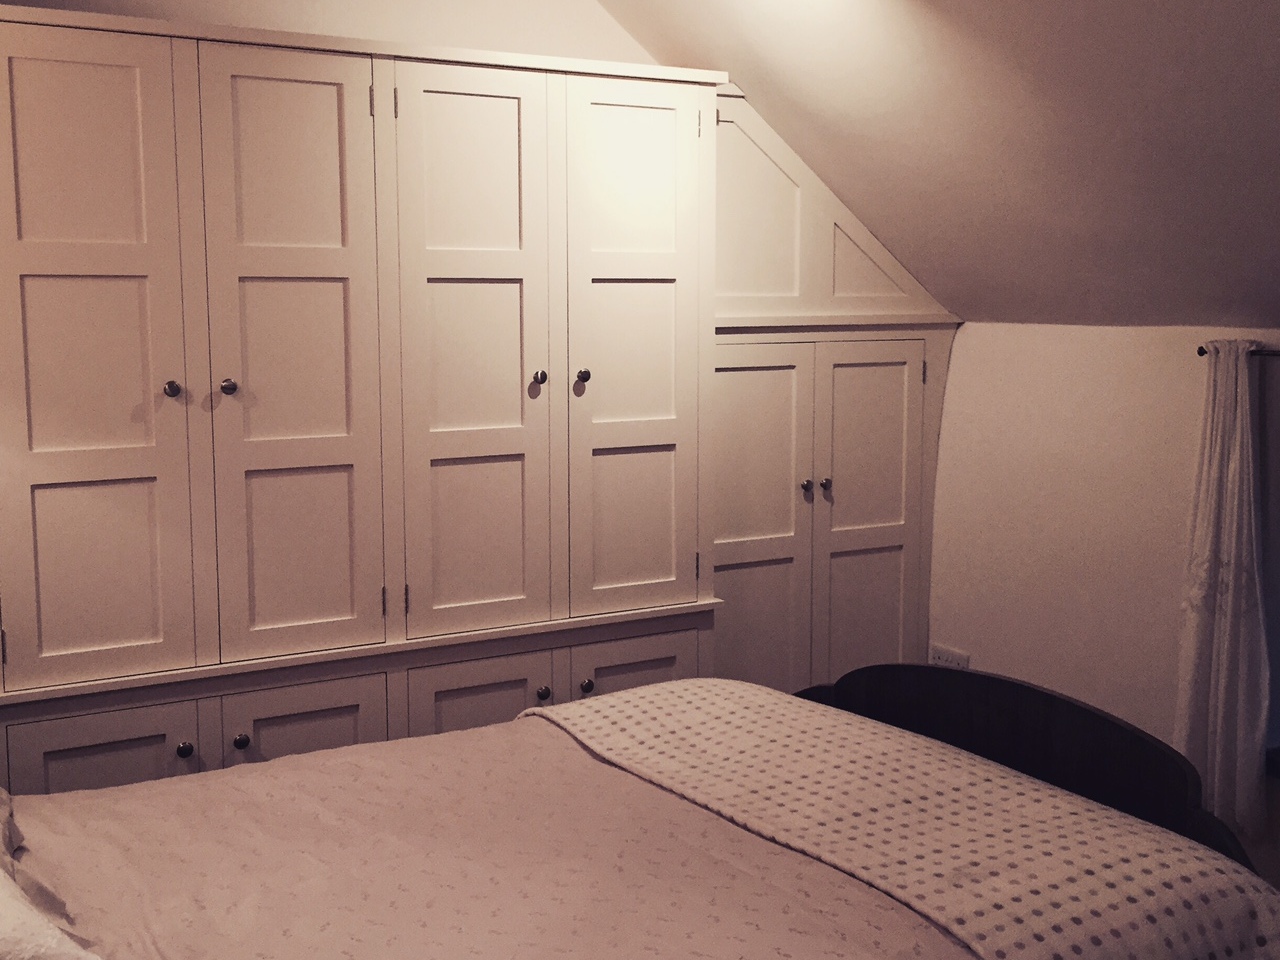 Individually designed fully fitted bedroom furniture hand built from solid wood in shaker style.